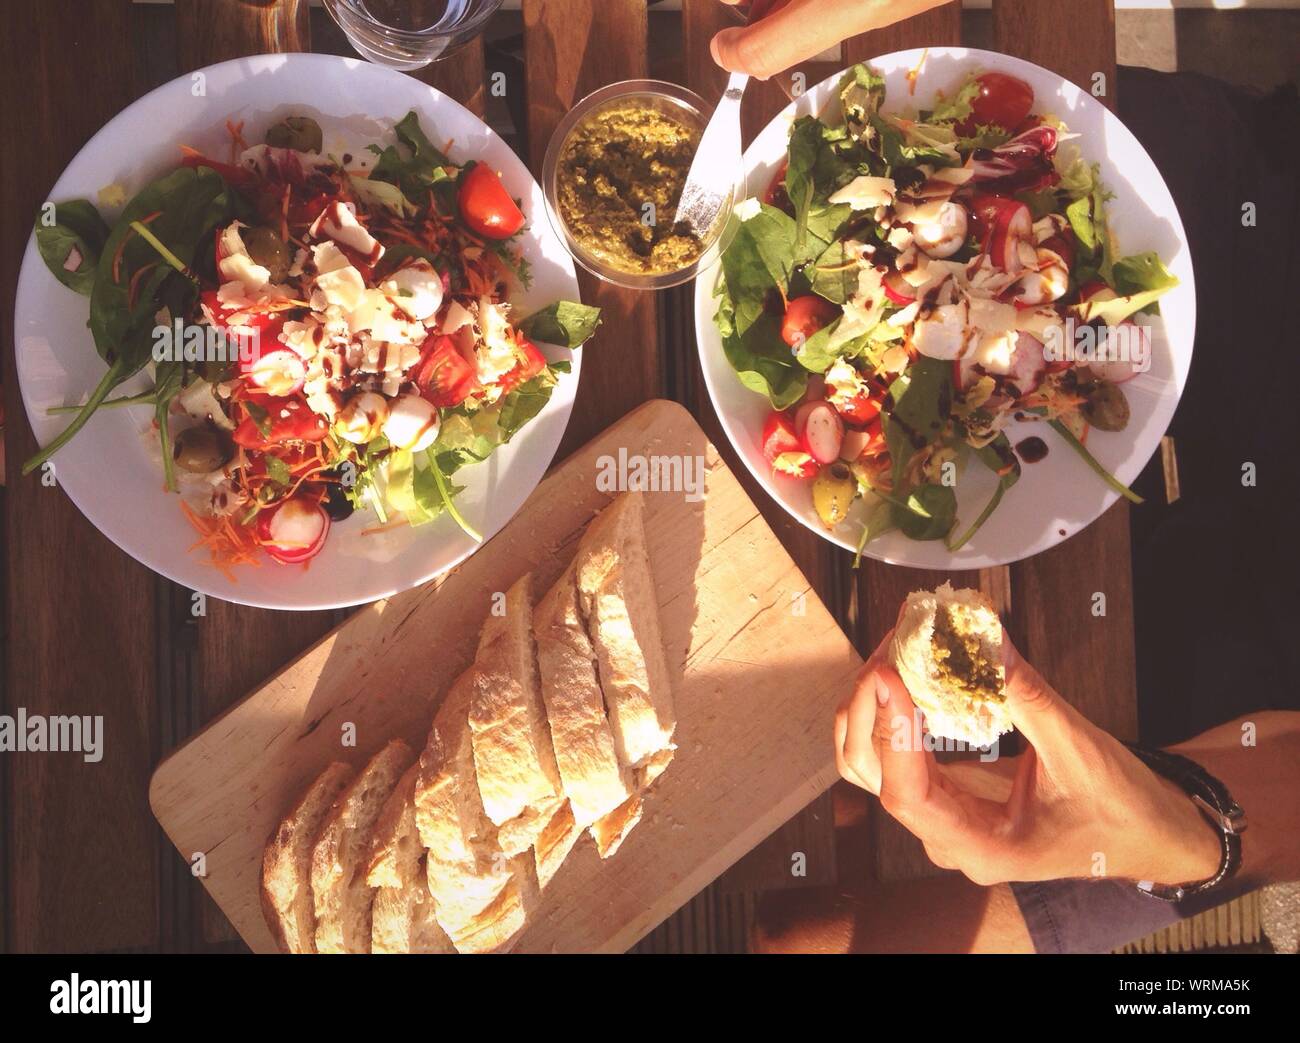 High Angle View Of Mediterranean Food Served On Table Stock Photo